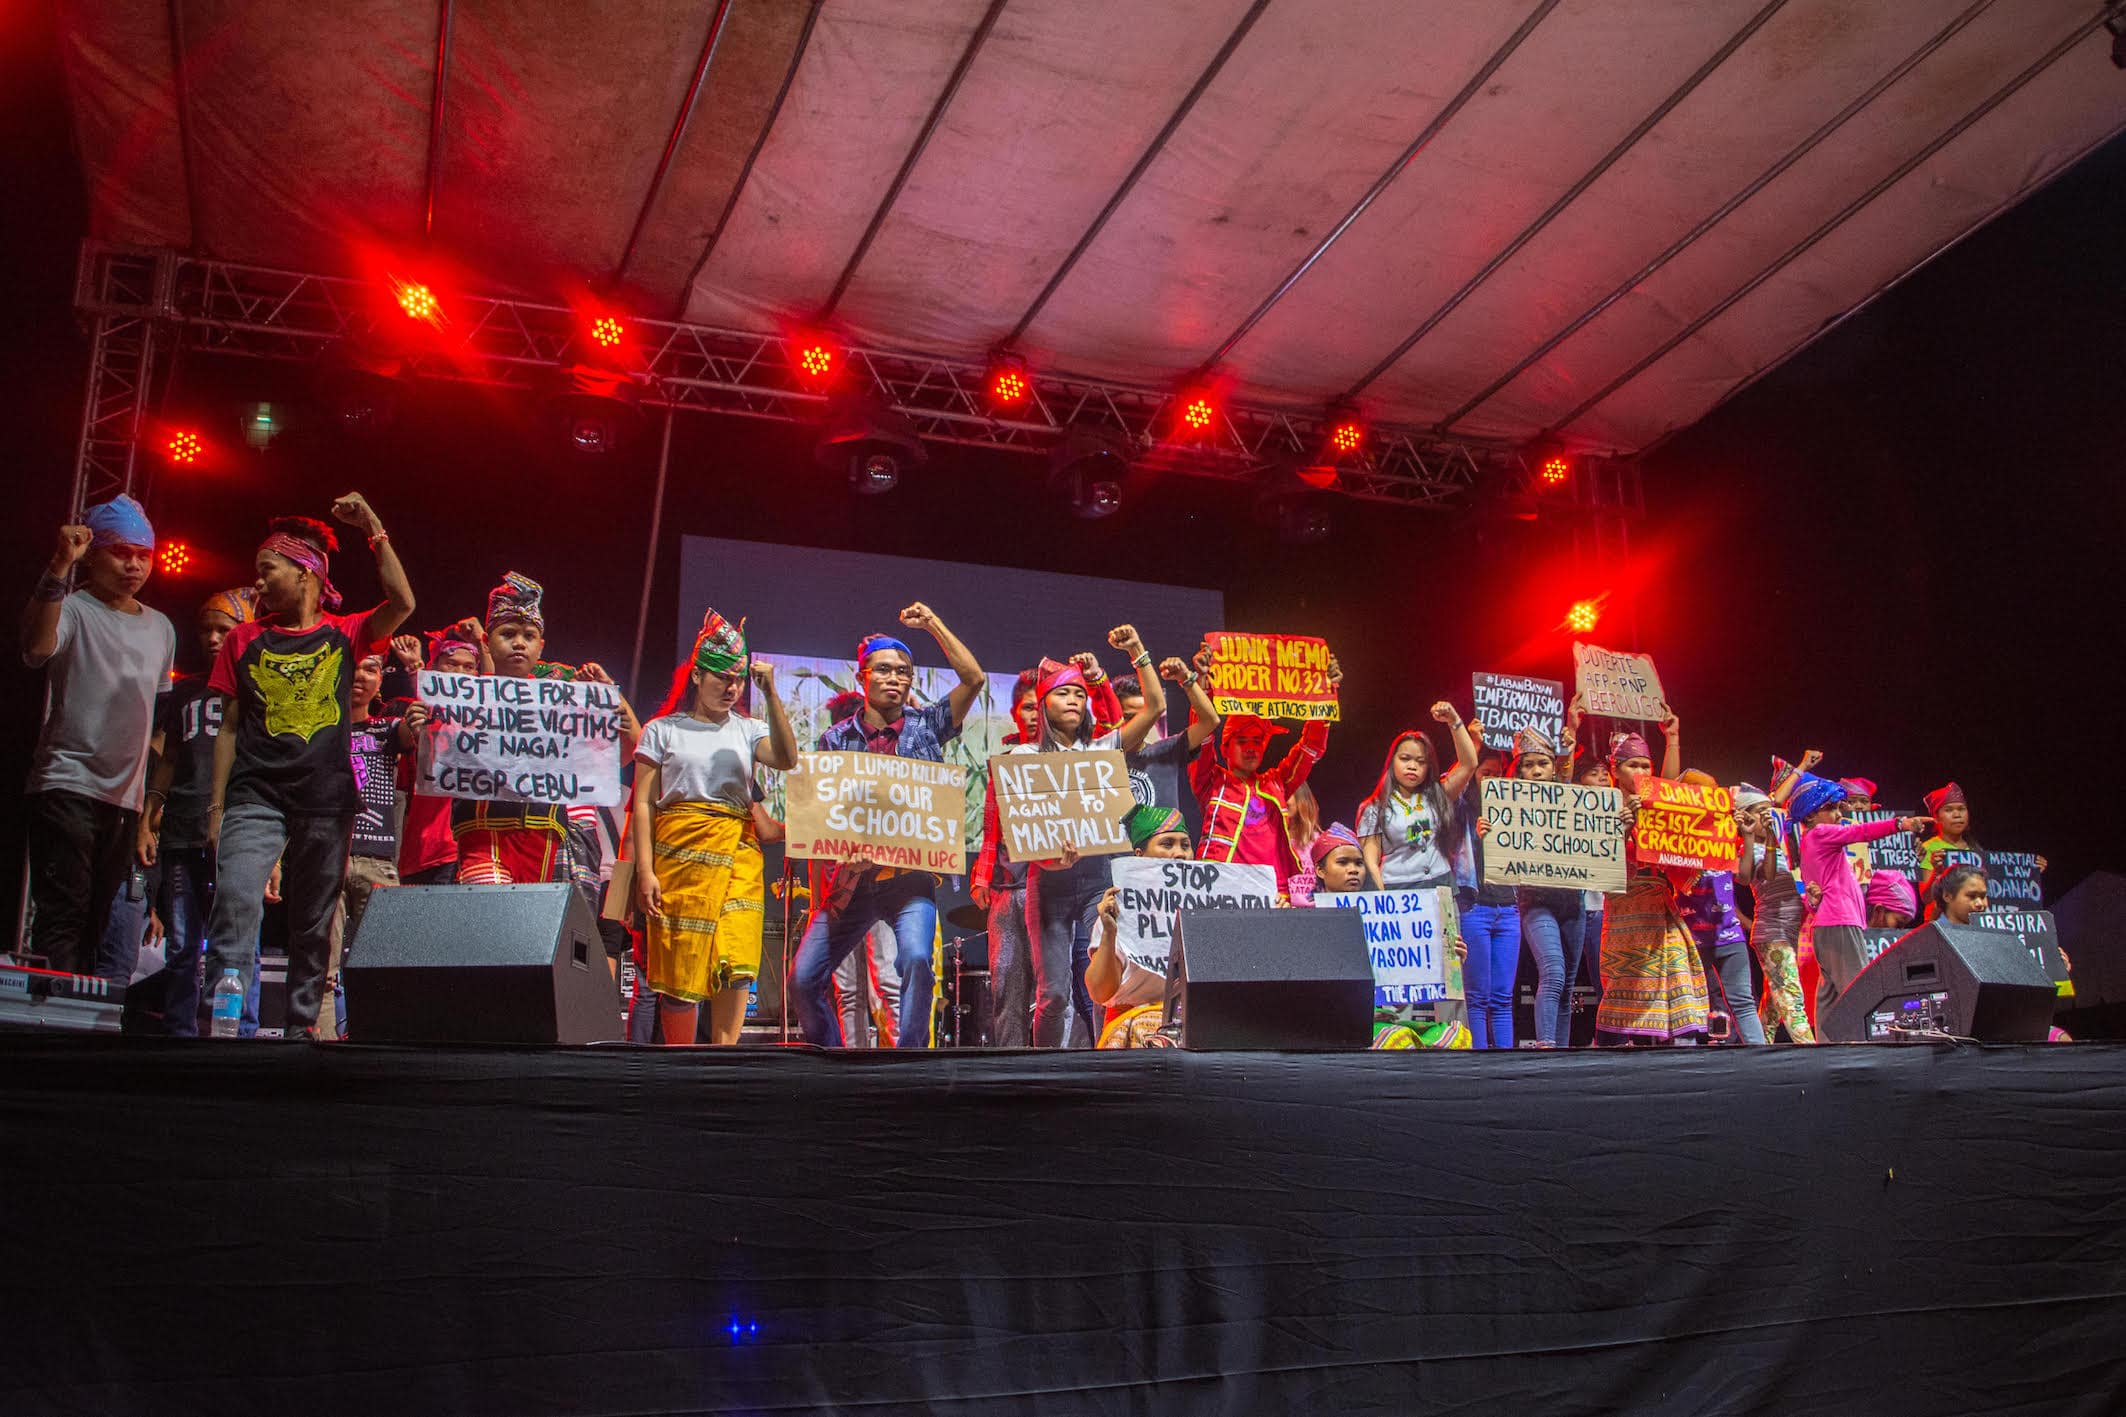 The Lumad calls to stop the attacks during their theatrical performance. Photo courtesy of UP Cebu Cookout 2019 